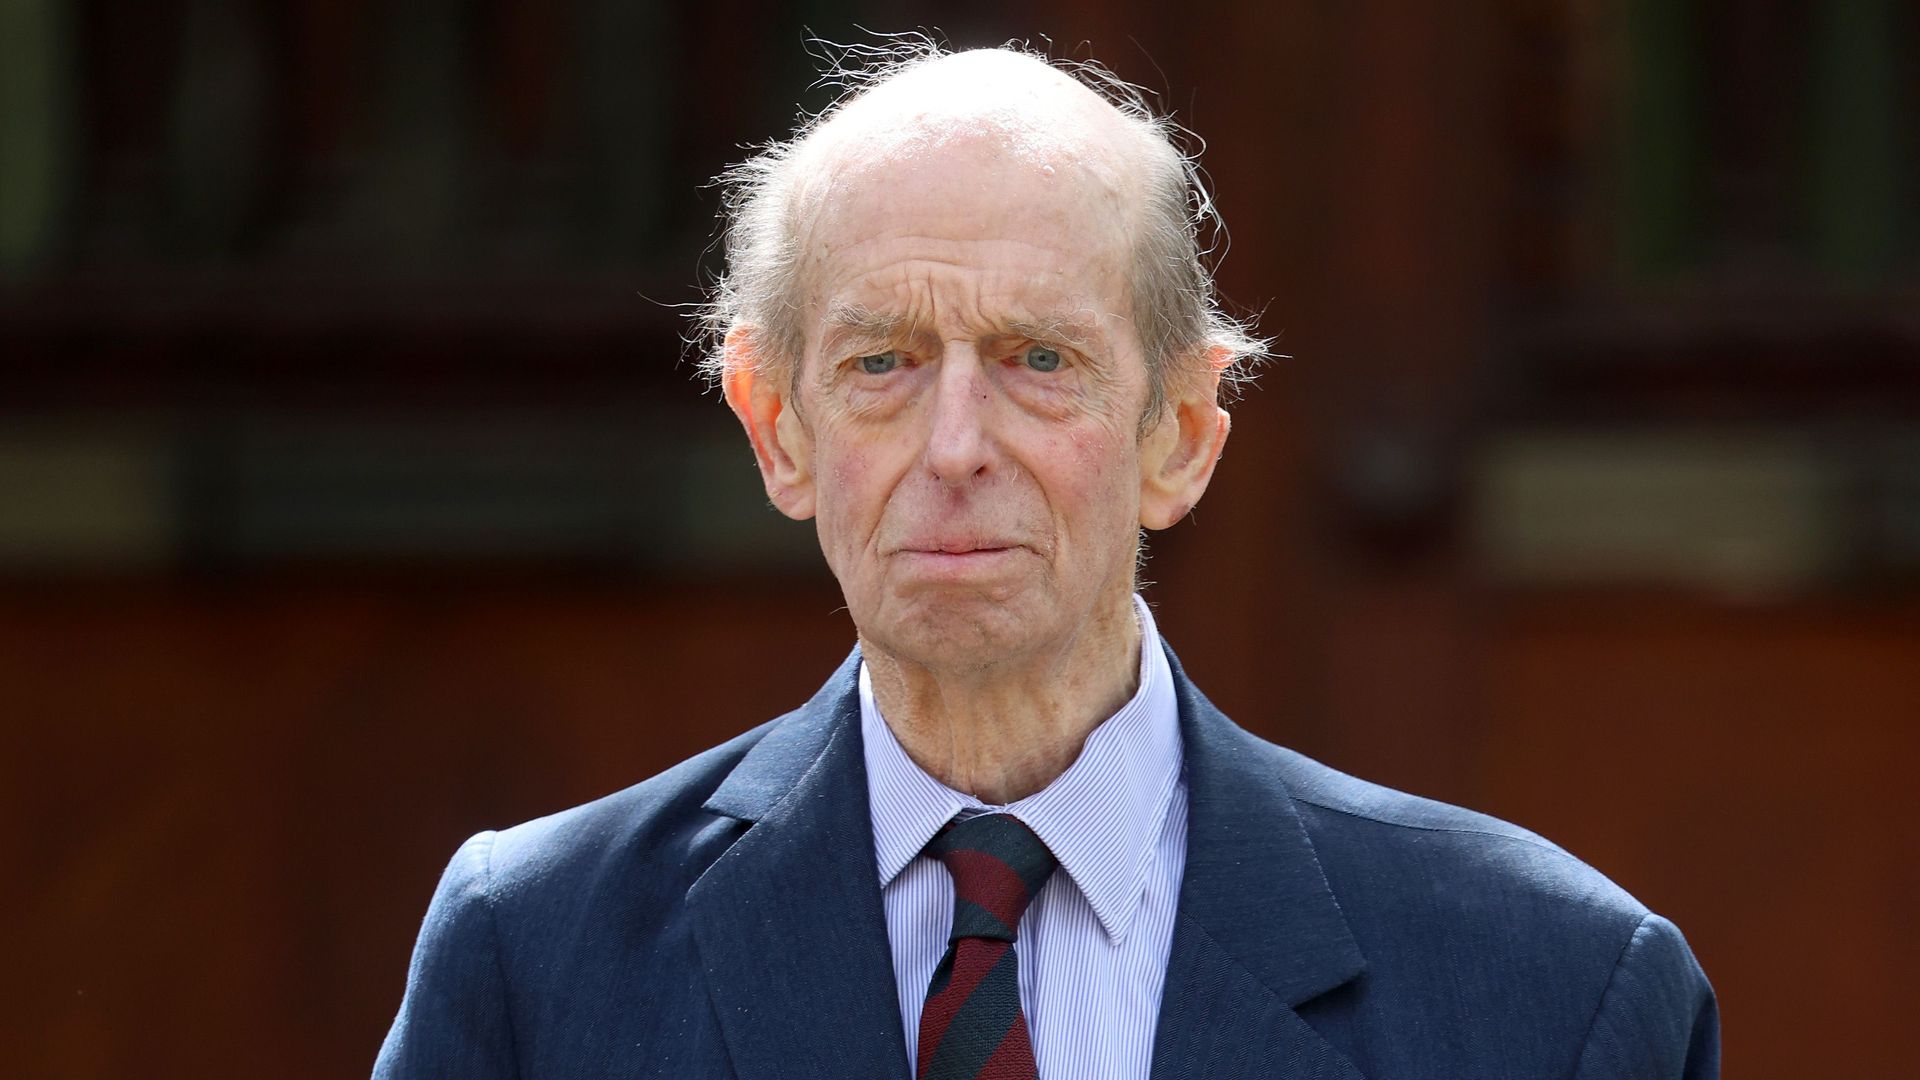 The Duke of Kent bids emotional farewell to long-held royal role